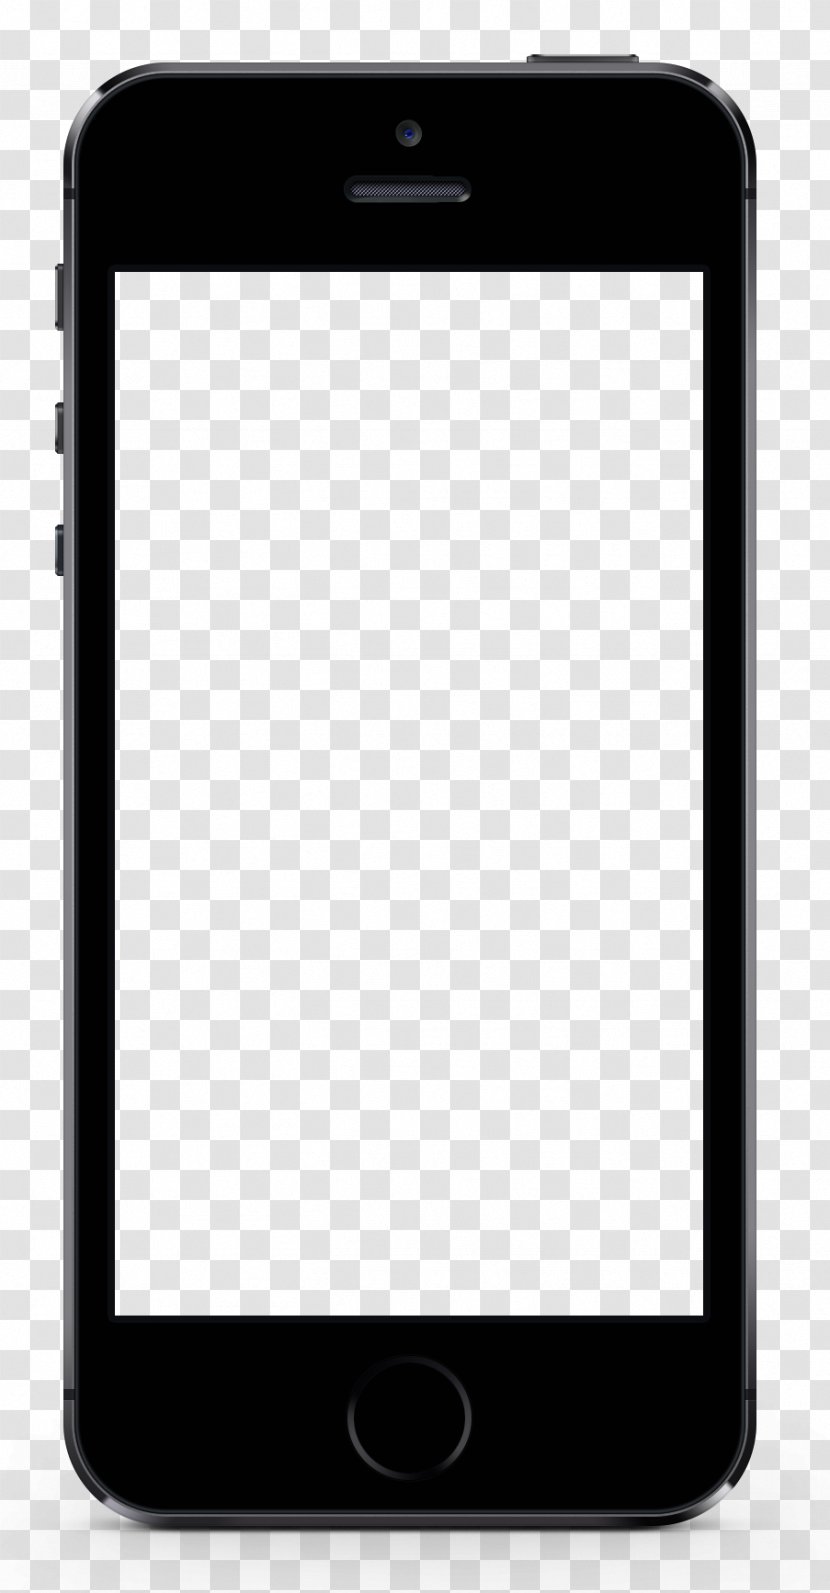 IPhone 5s 6 Clip Art - Mobile Phone Accessories - Iphone Transparent PNG